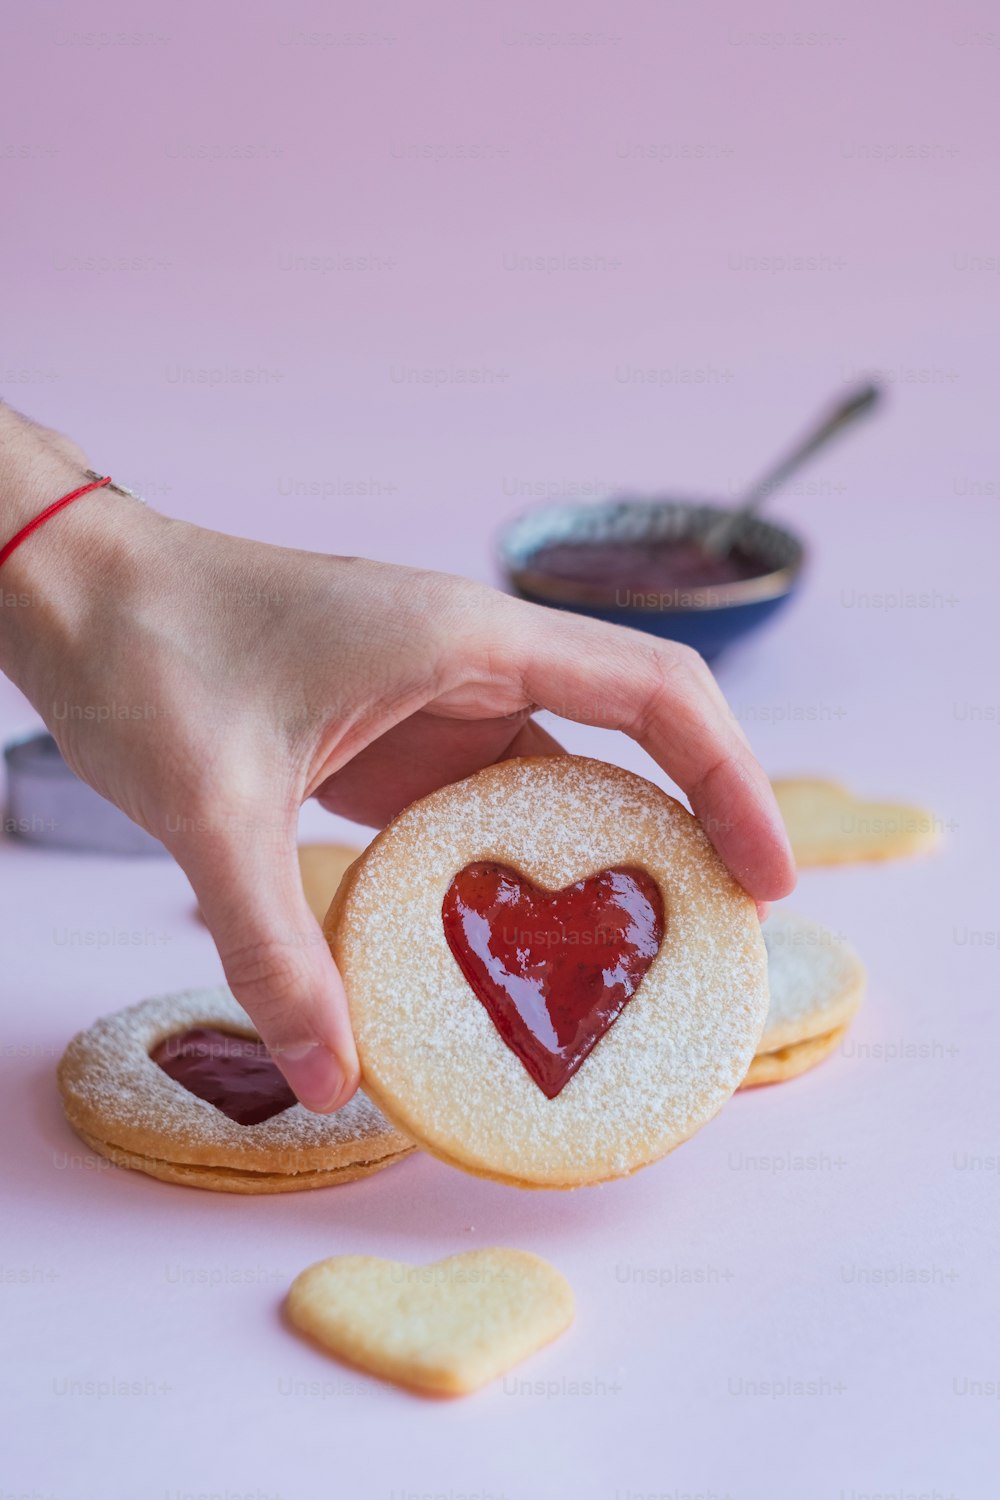 a heart shaped cookie being held by a hand